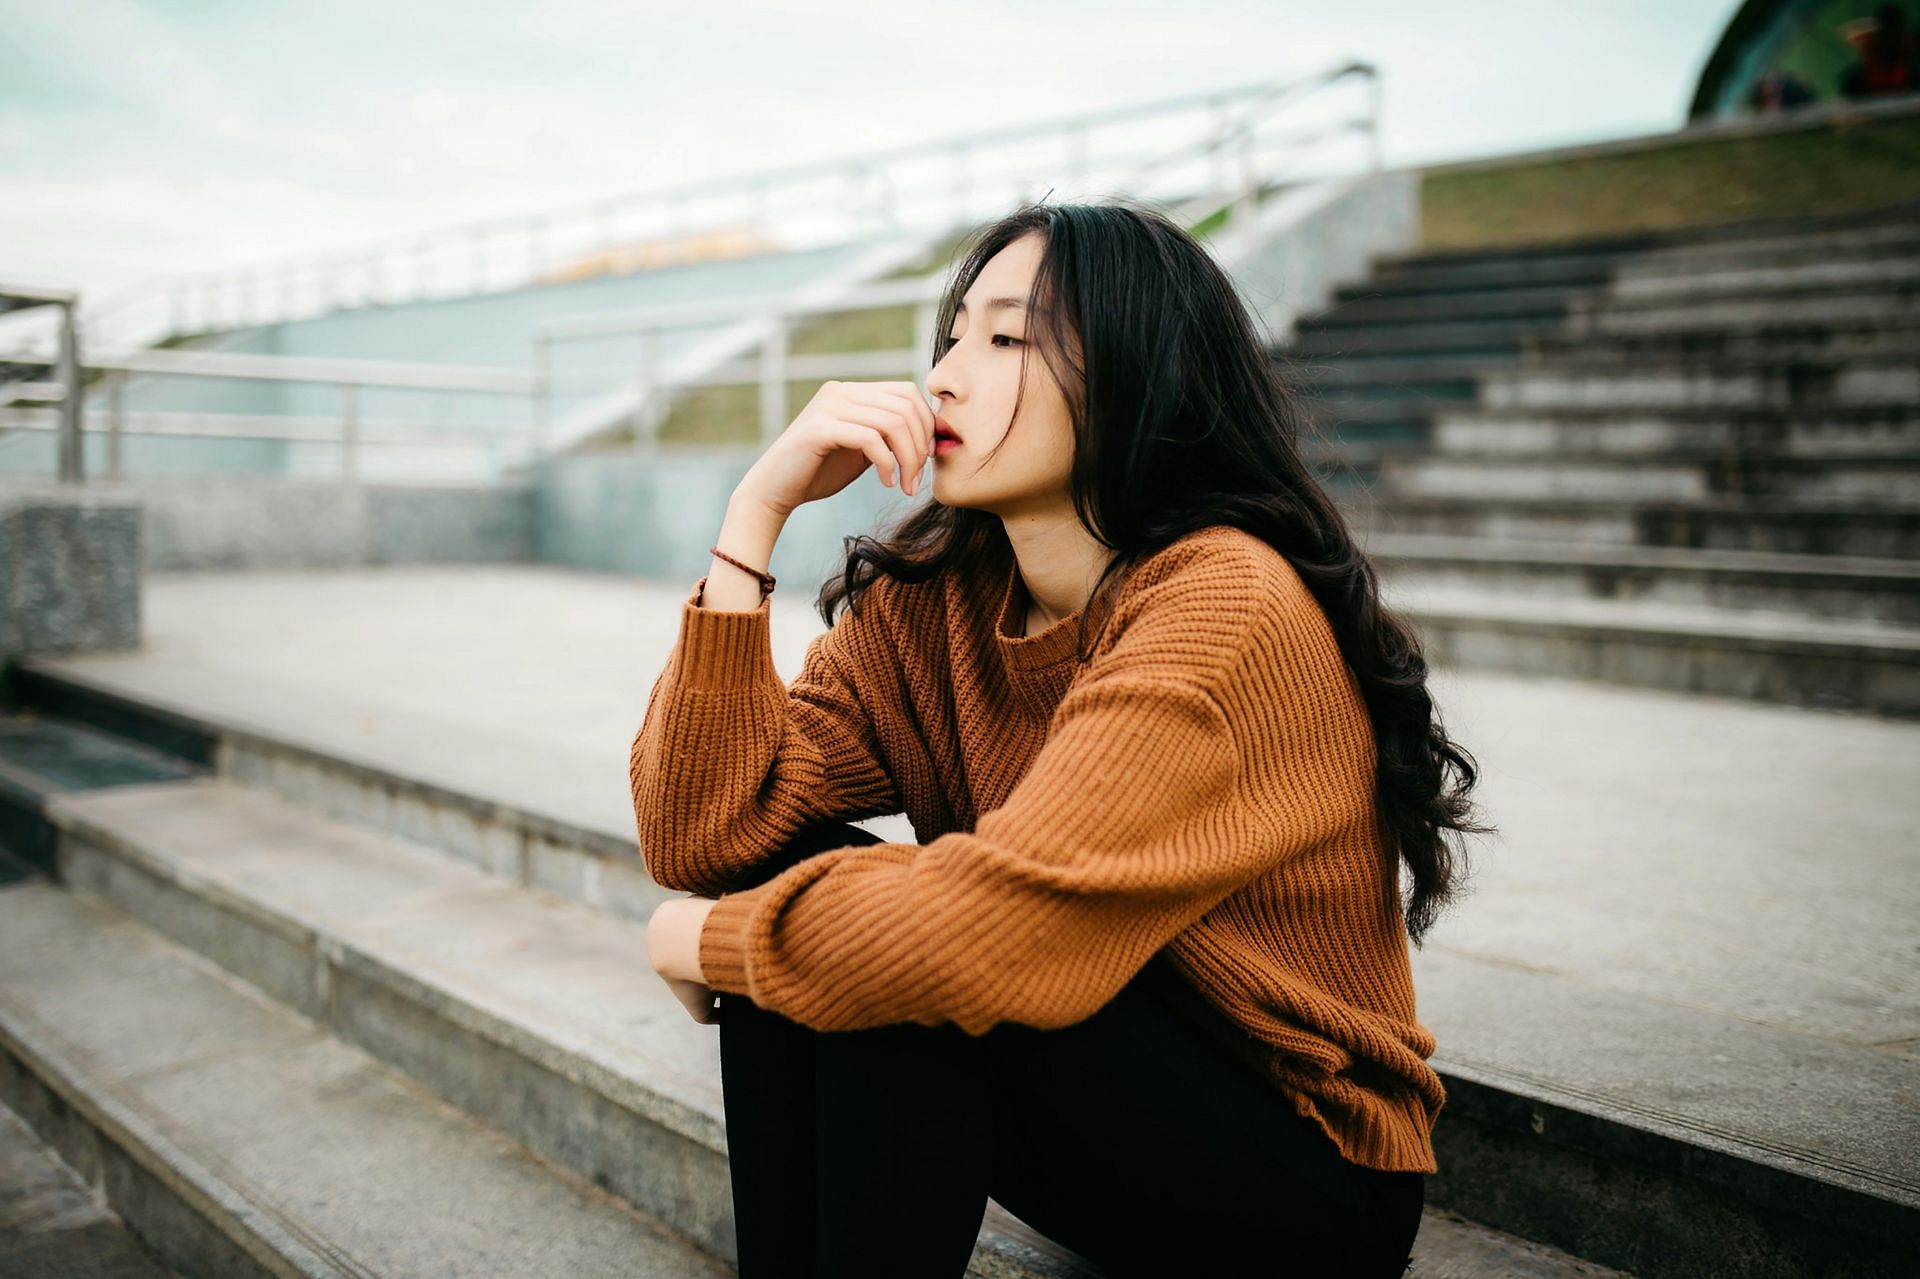 Japanese techniques can regulate overthinking patterns and help you find relief in your cognitive world. (Image via Unsplash/Anthony Tran)